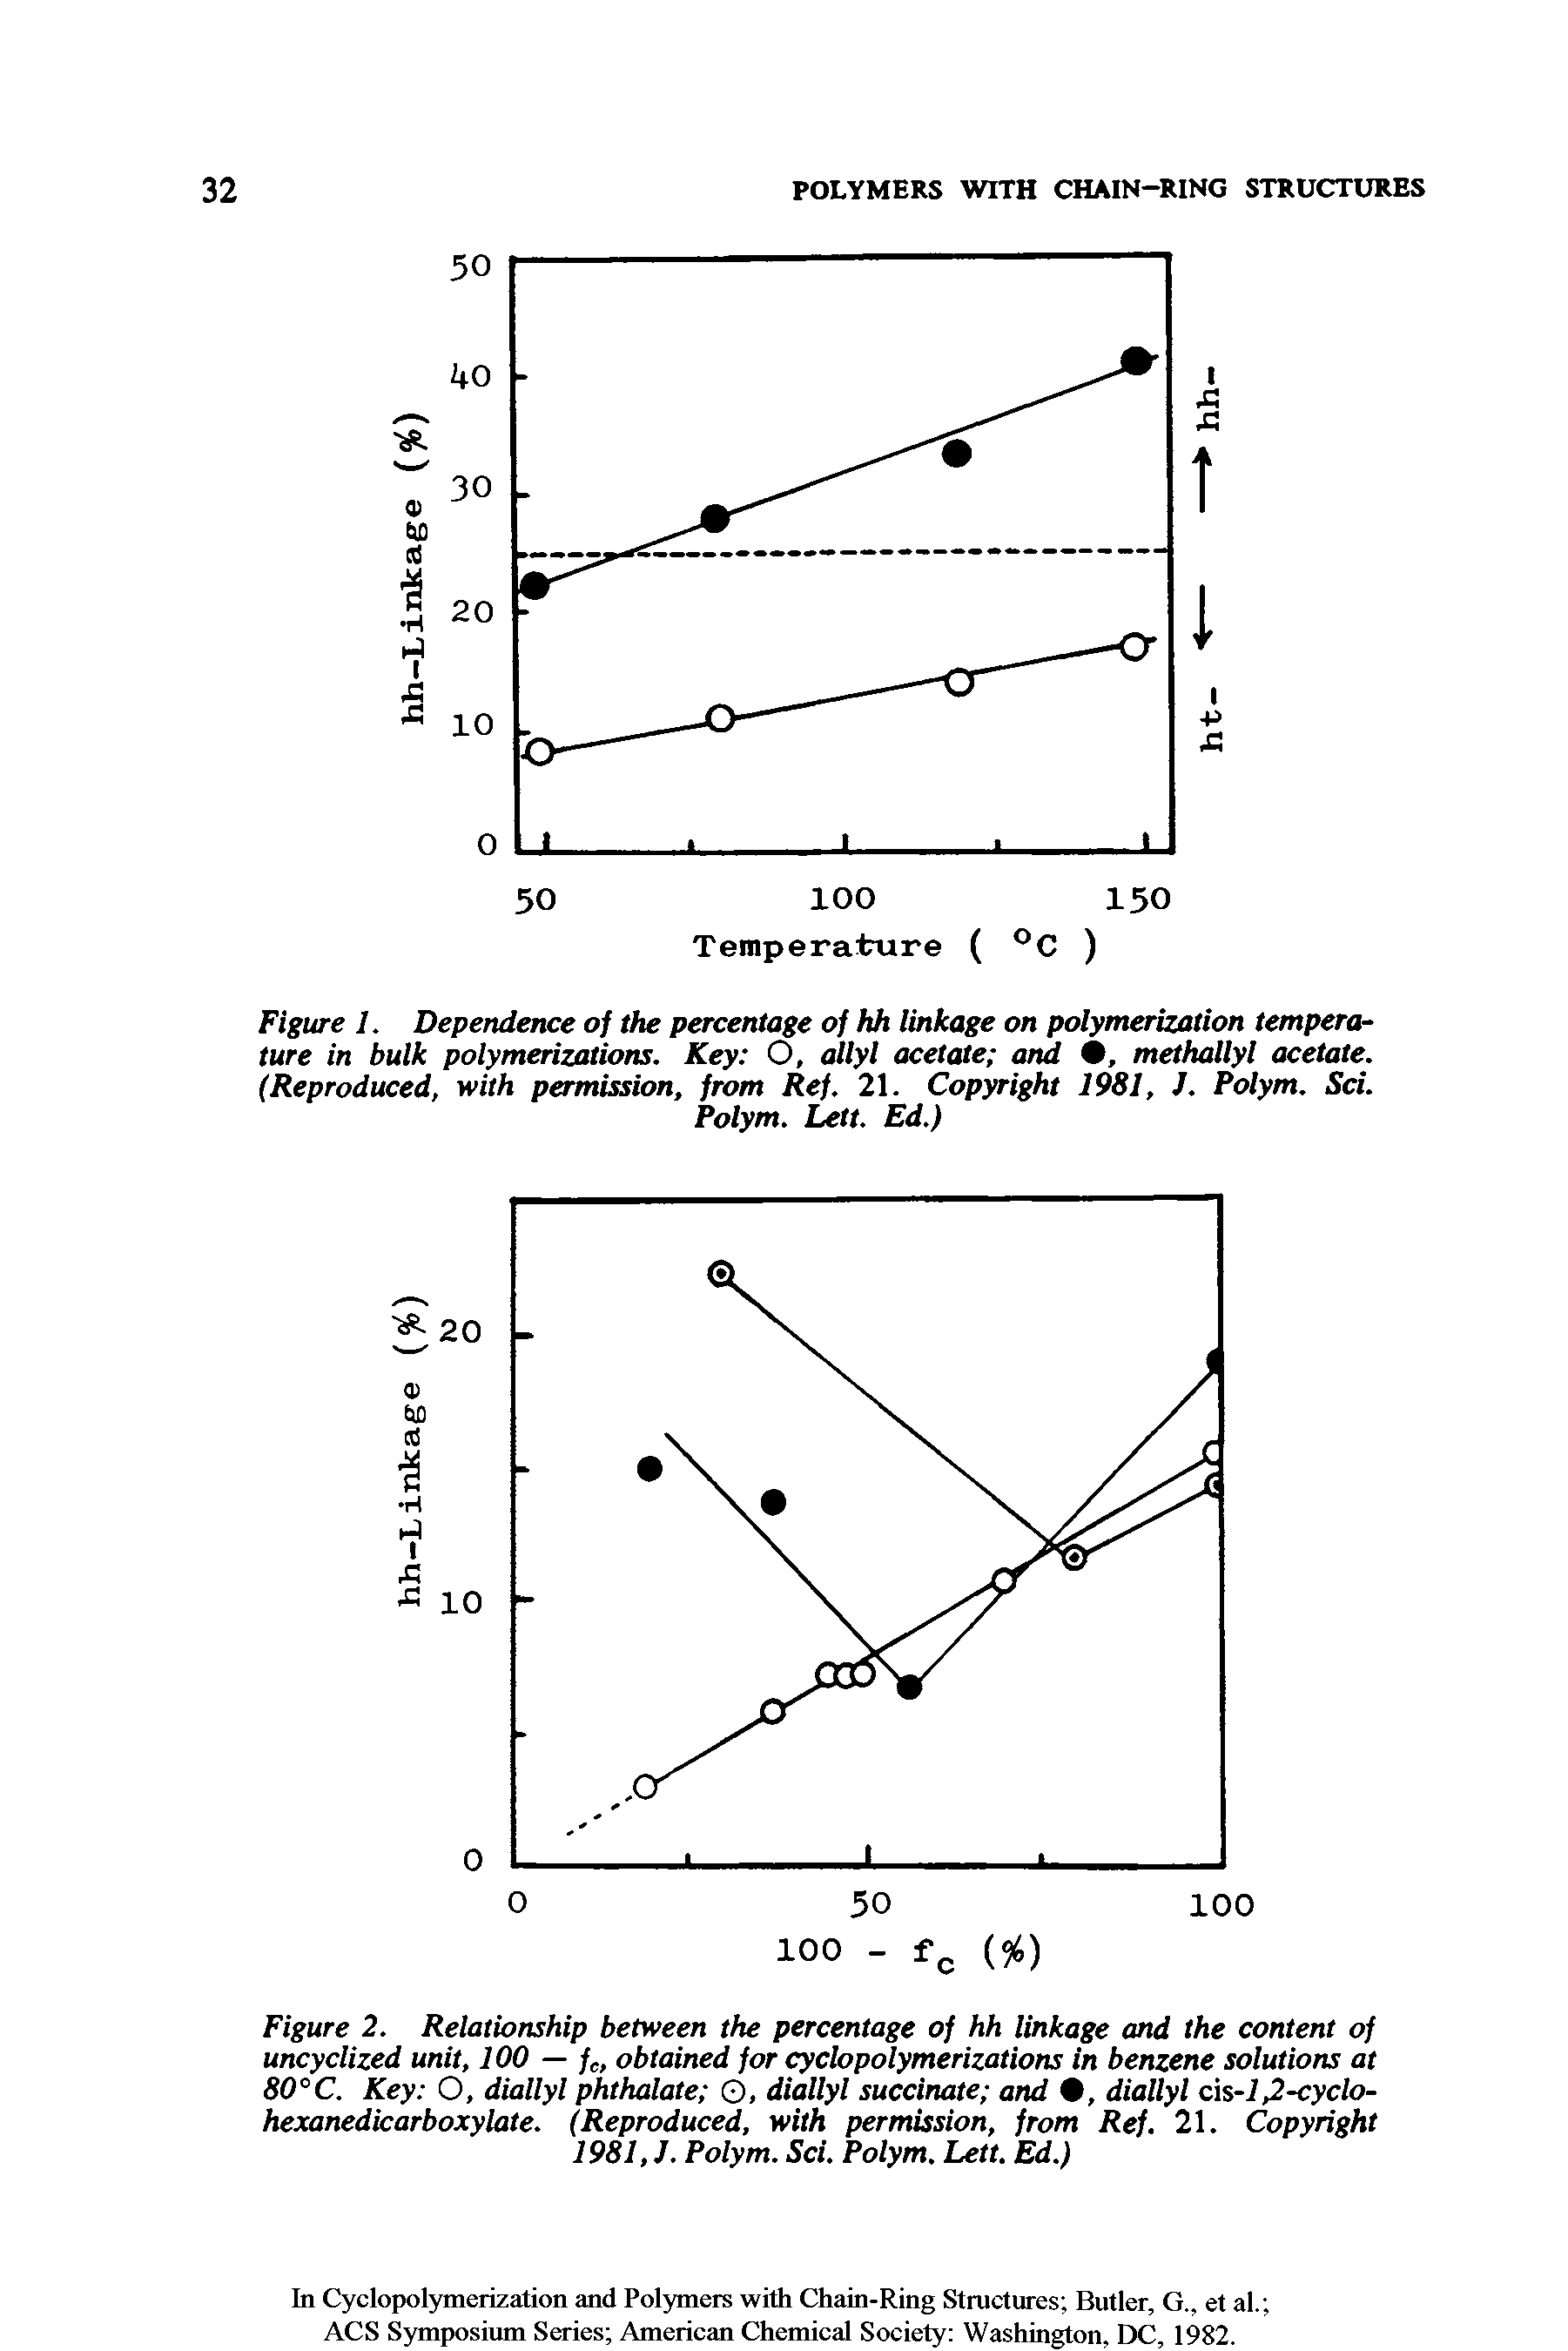 Figure 1. Dependence of the percentage of hh linkage on polymerization tempera-ture in bulk polymerizations. Key O, allyl acetate and , methallyl acetate. (Reproduced, with permission, from Ref. 21. Copyright 1981, J. Polym. Sci.